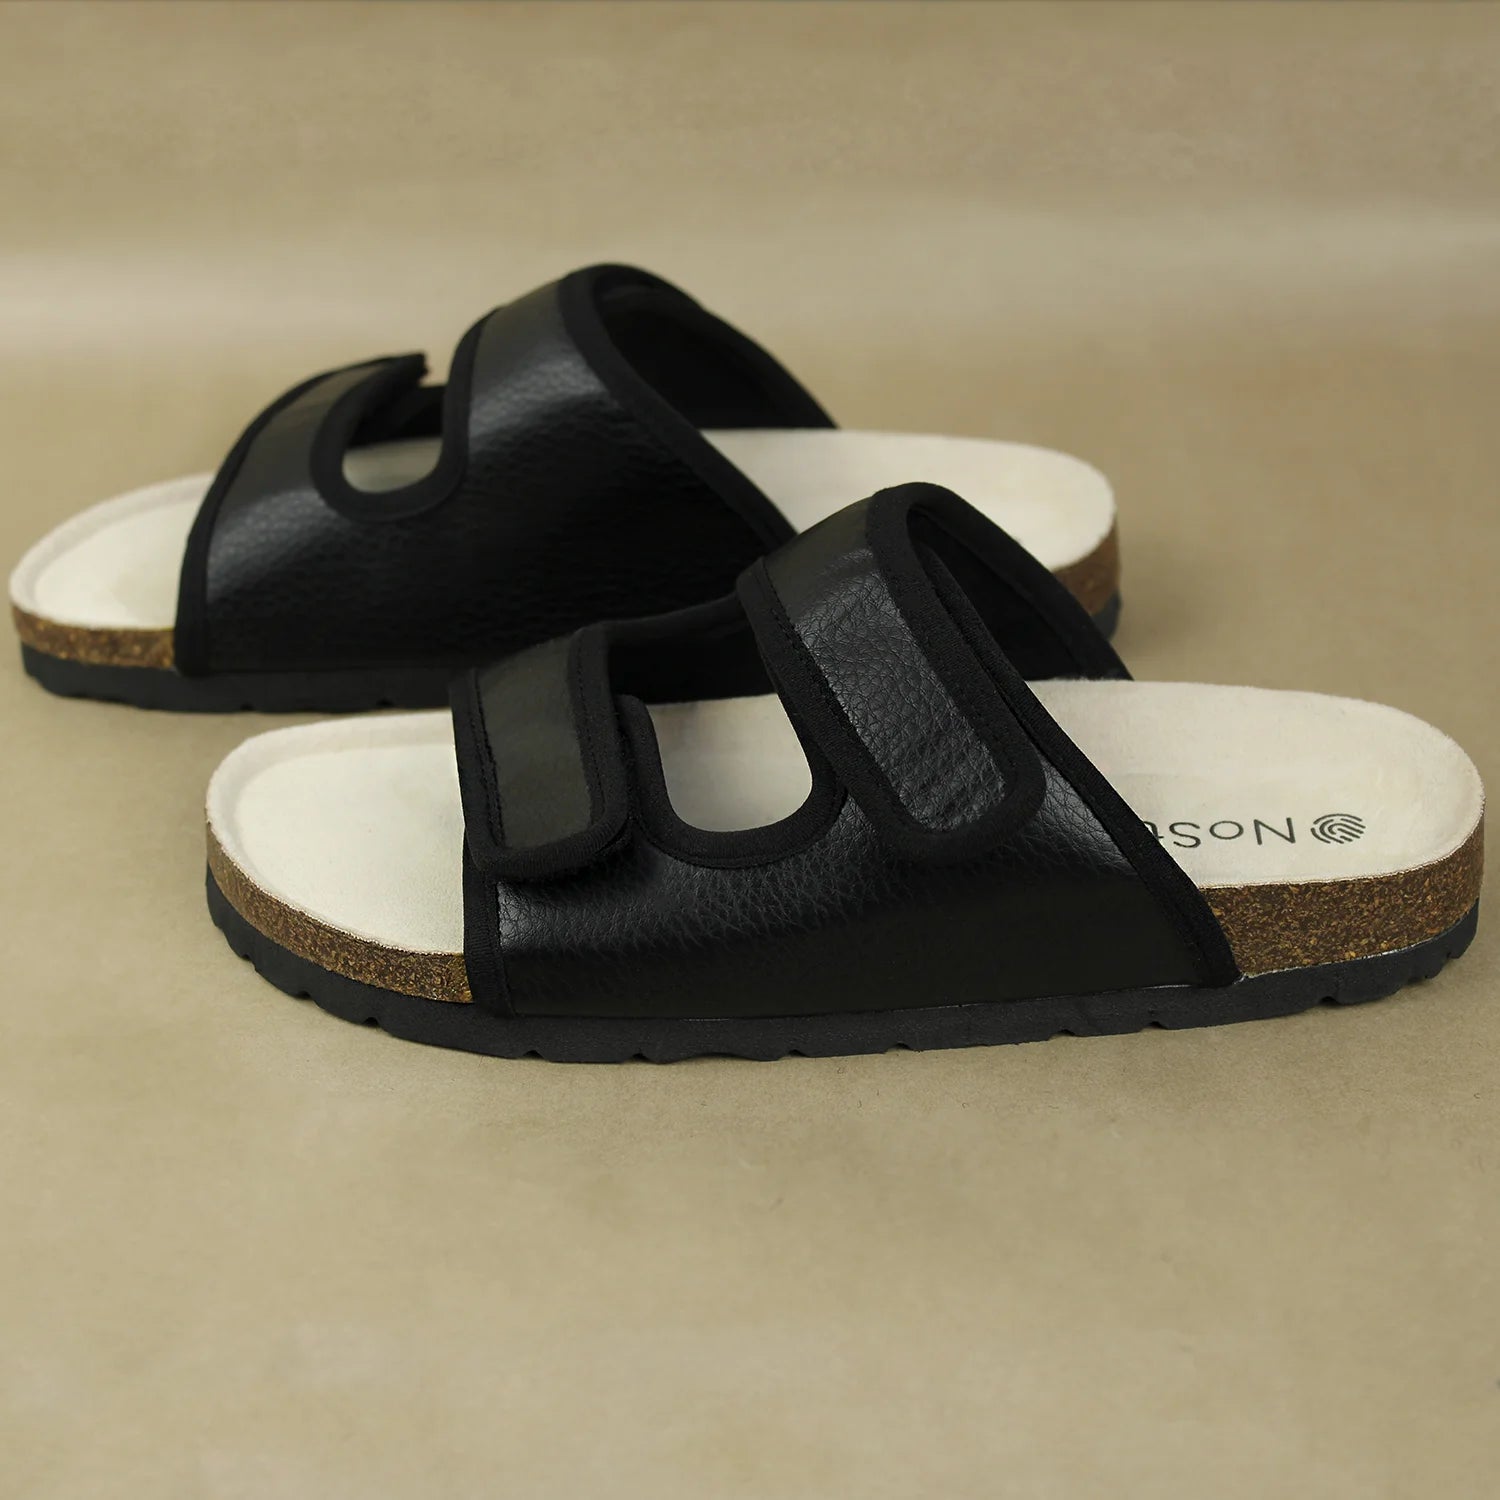 Stylish black cork sandals with natural cork footbed